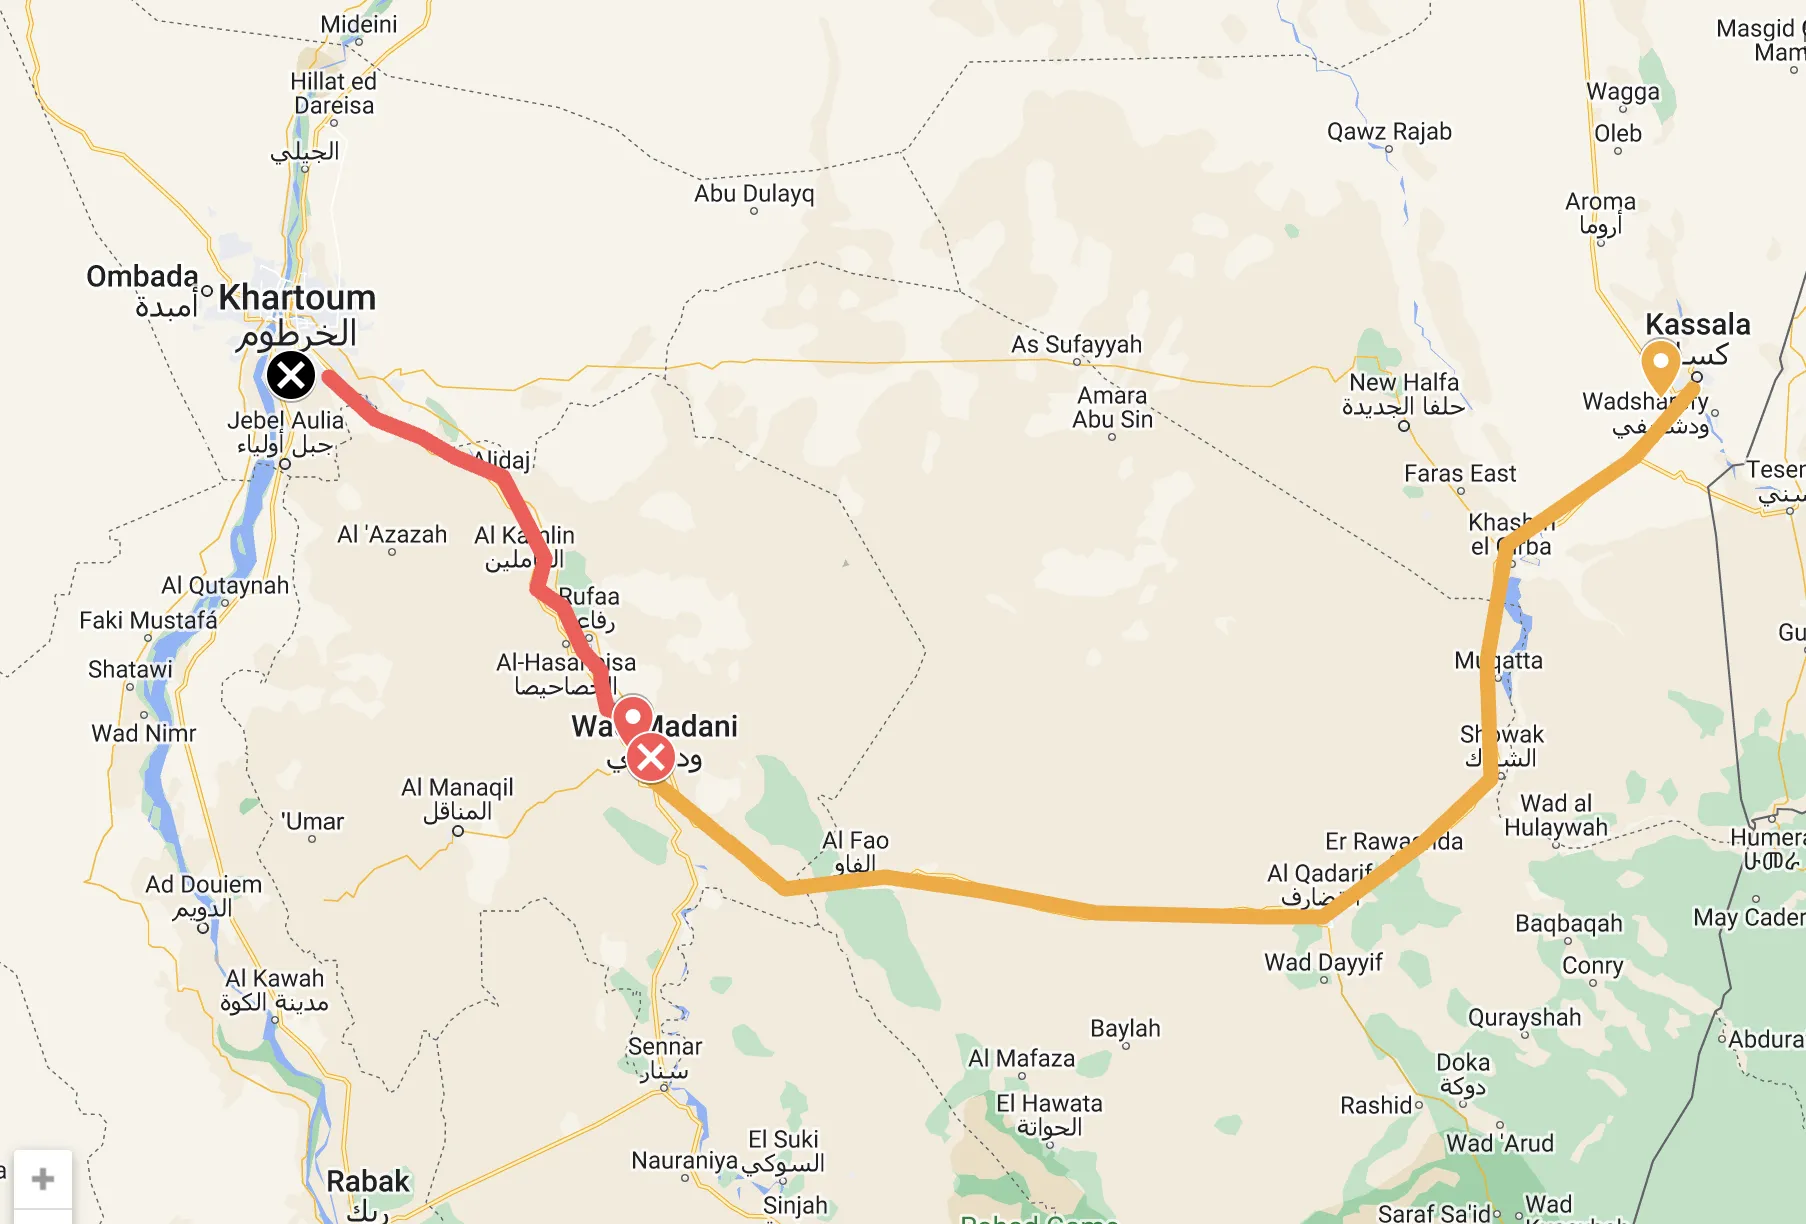 Close-up map with red line from Khartoum to Wad Madani, and orange line from Madani to Kassala.